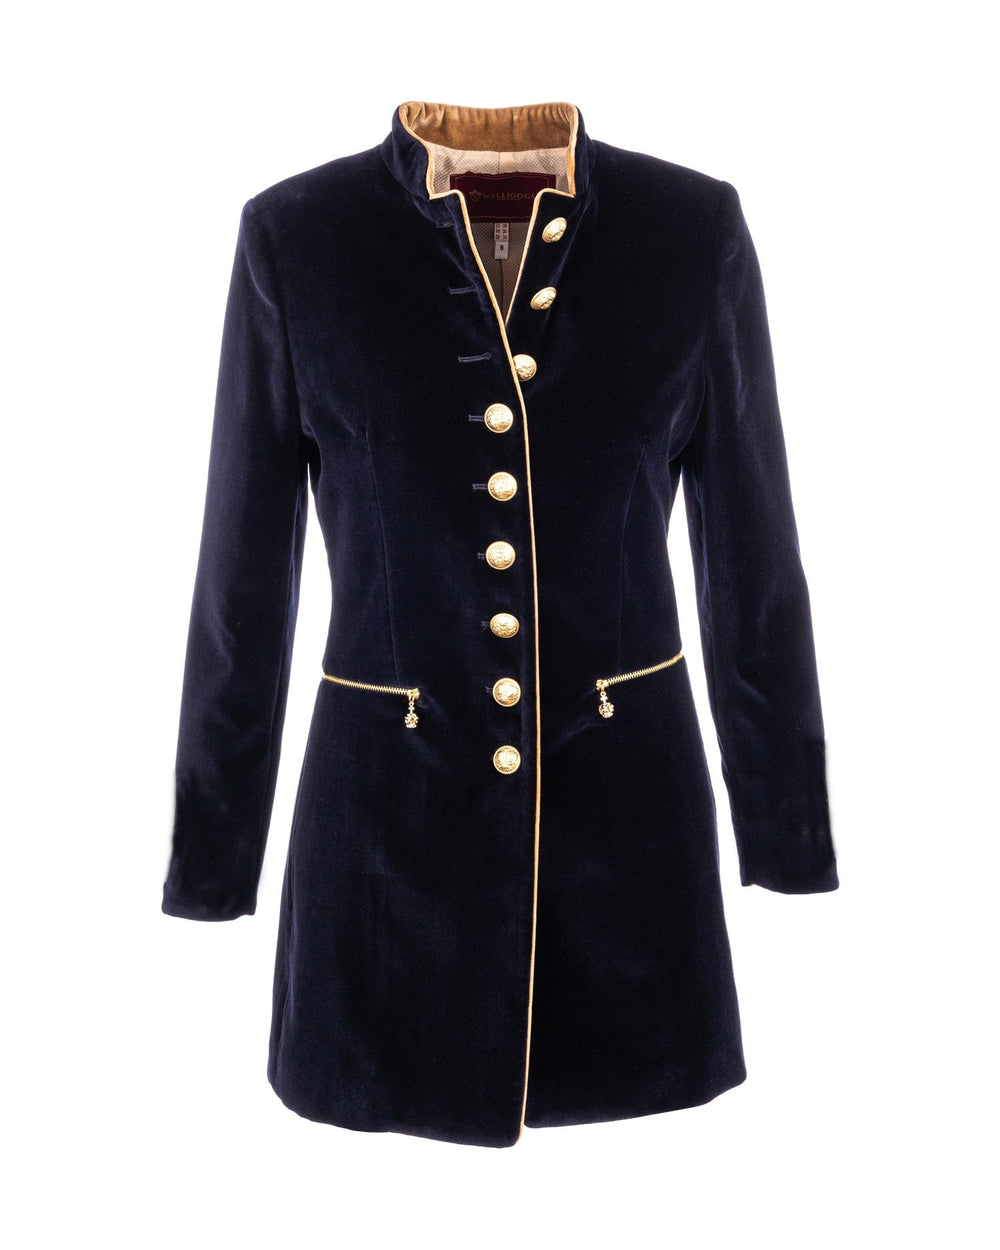 Our Seville Navy Velvet Coat is a tailored dream. The tan piping detailing and muted gold buttons contrast beautifully with the navy velvet, and the inside cuffs reveal exquisite pops of colour. The zipped pockets with crown charms are playful and the mid length style is refined. We think this coat pairs beautifully with the Phoebe Gold Shirt and Brooklyn Navy Boots.